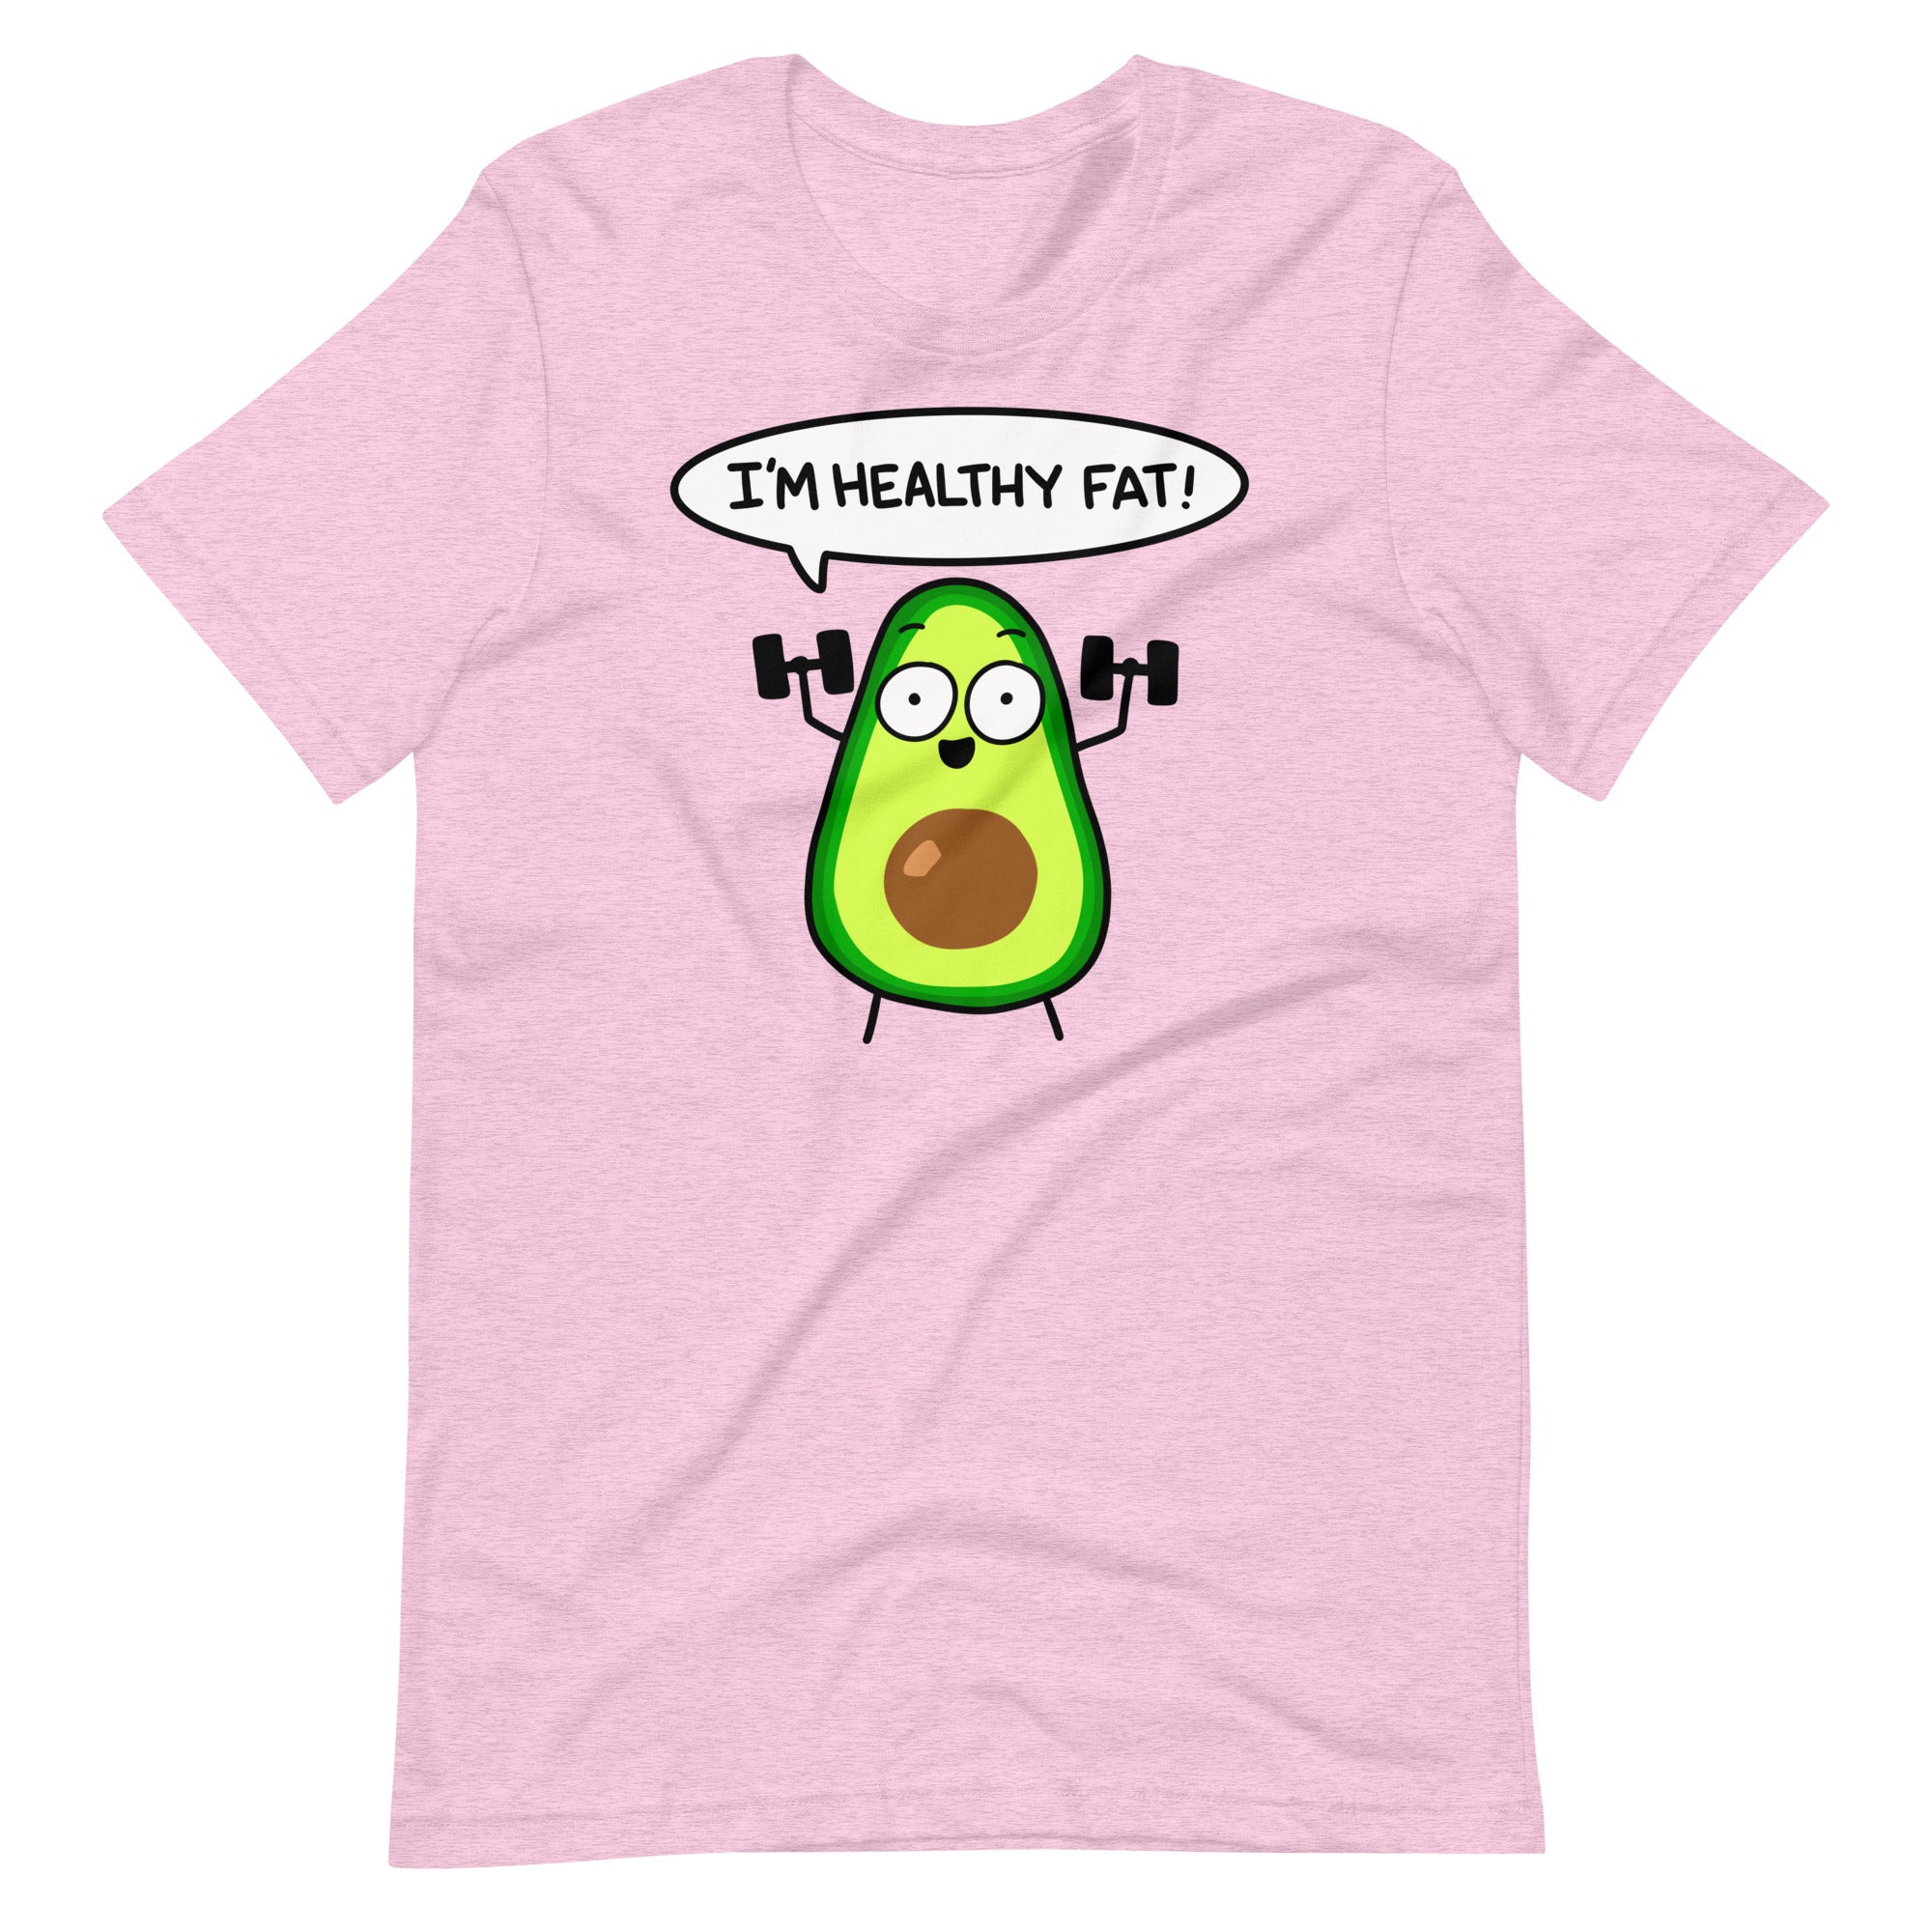 Silly fitness avocado t-shirt, funny workout graphic tee